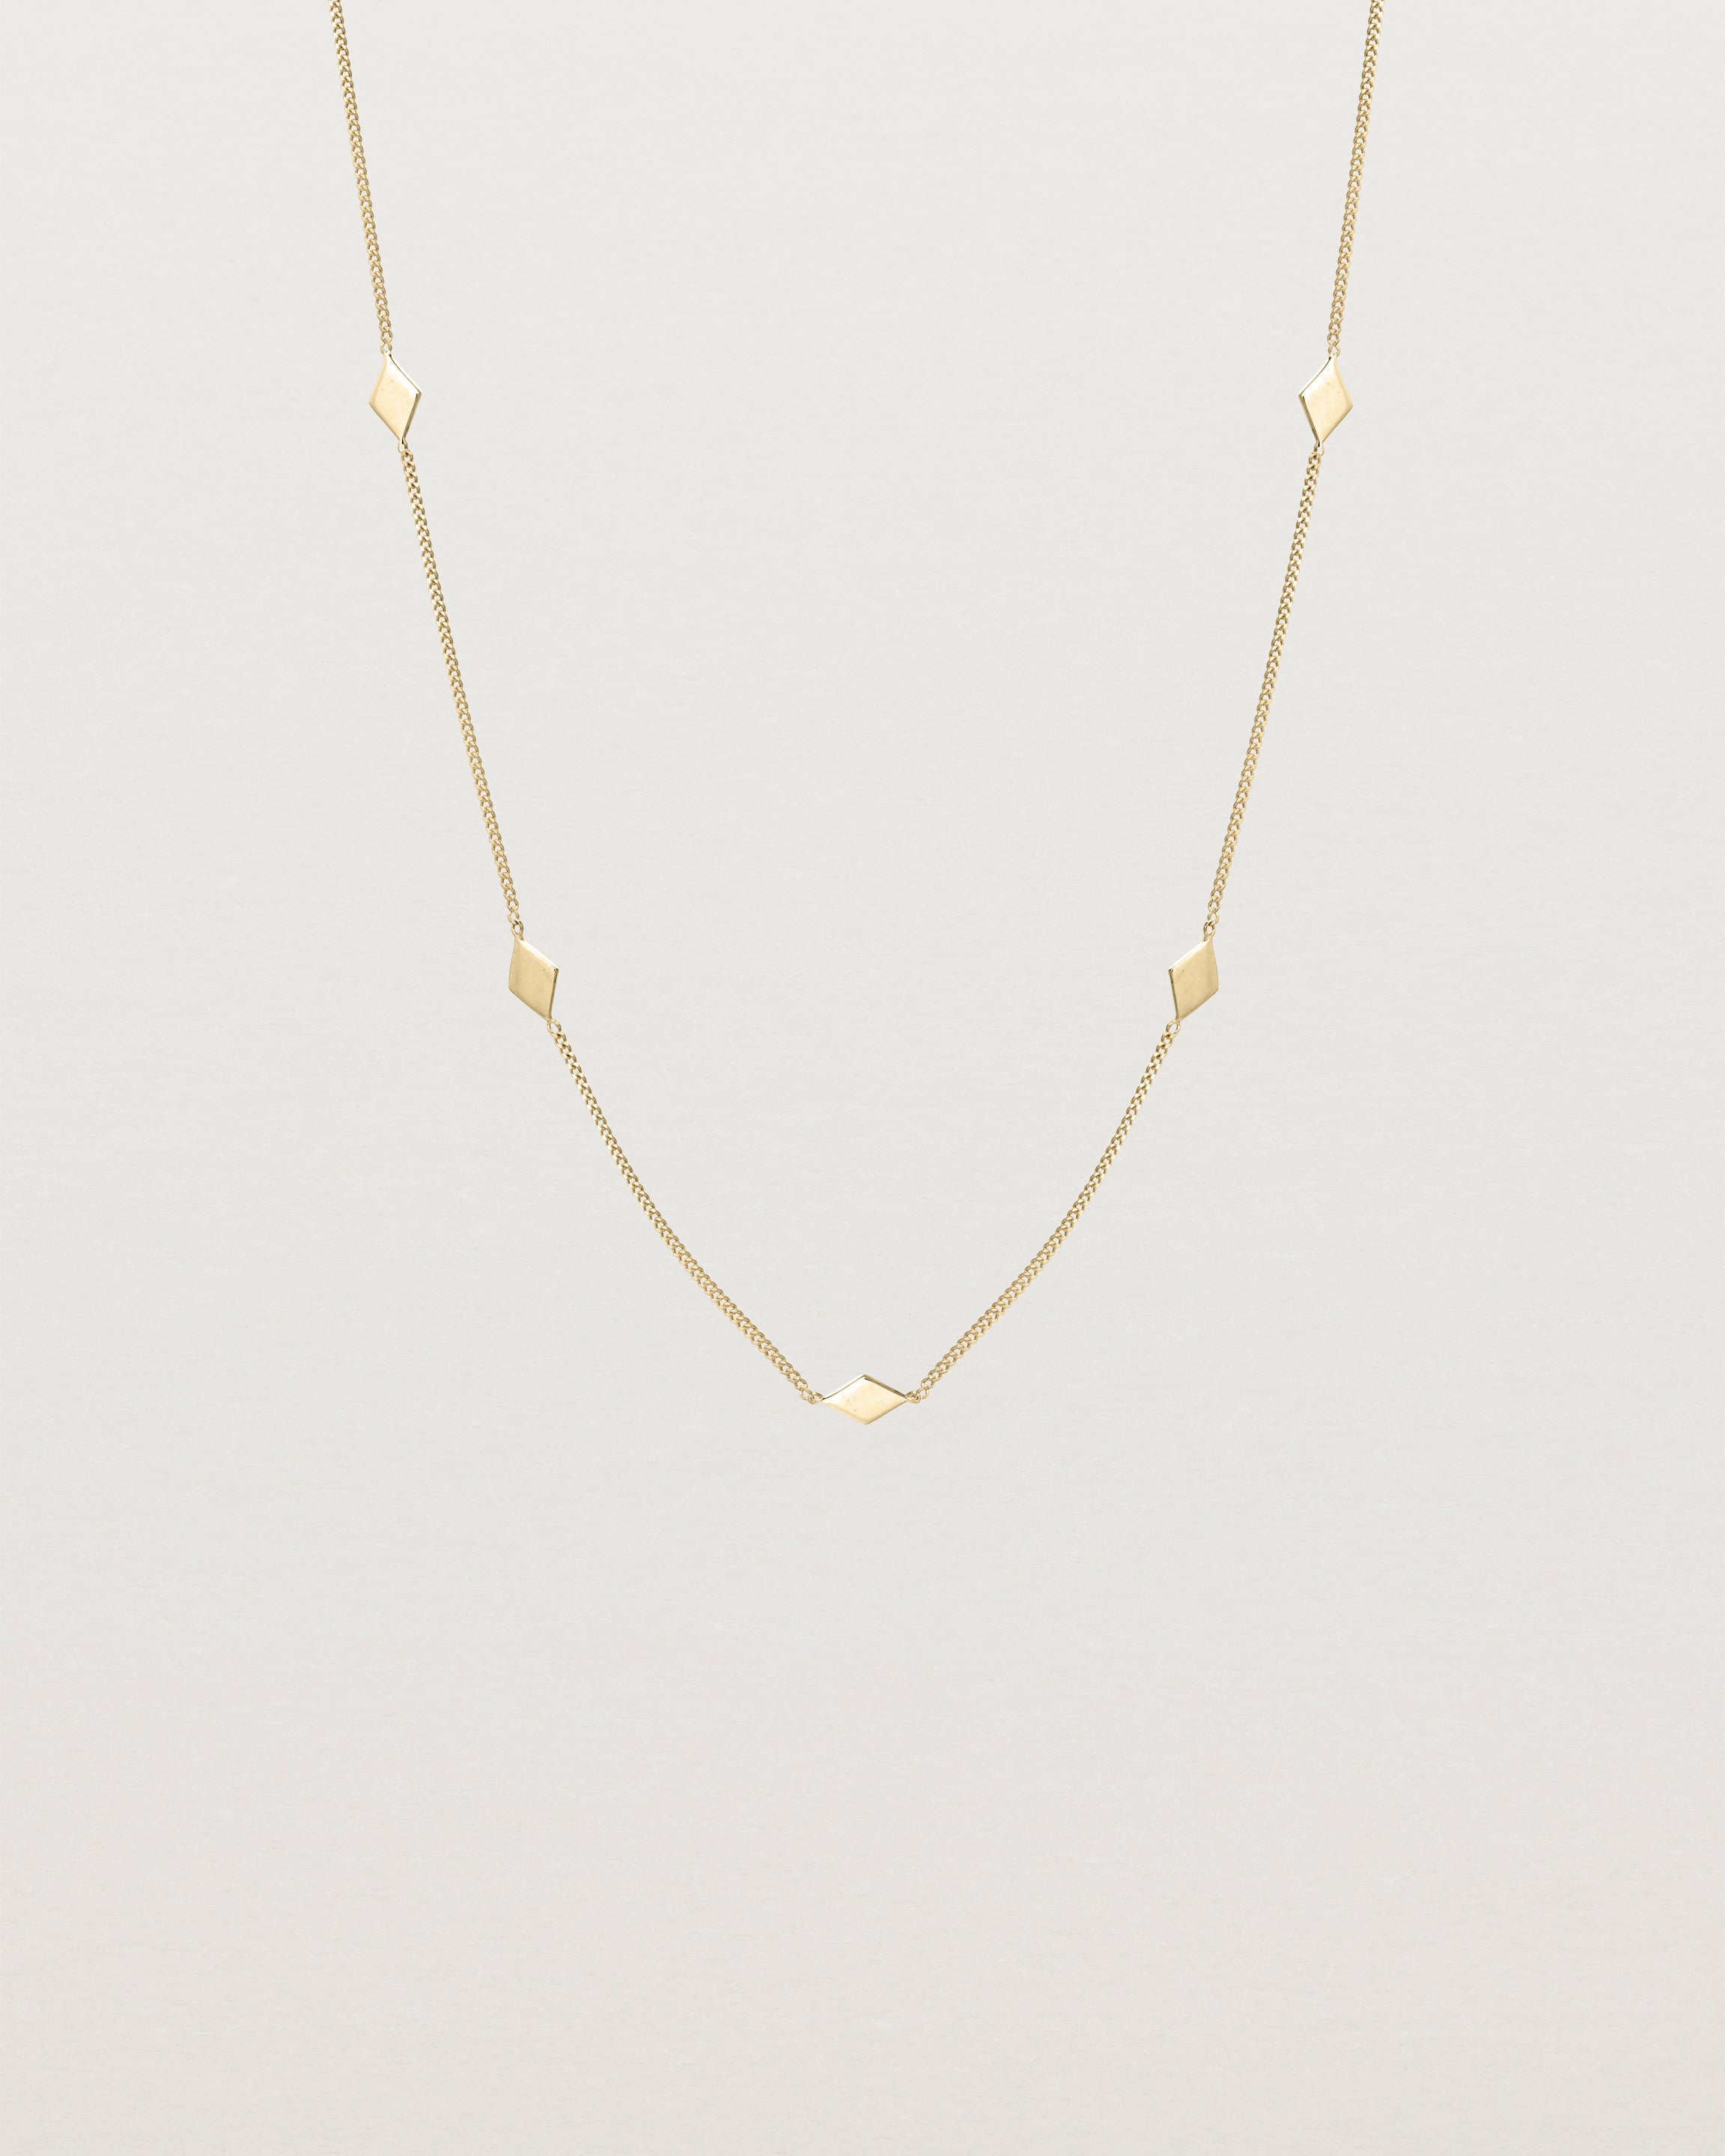 Front view of the Nuna Charm Necklace in yellow gold.